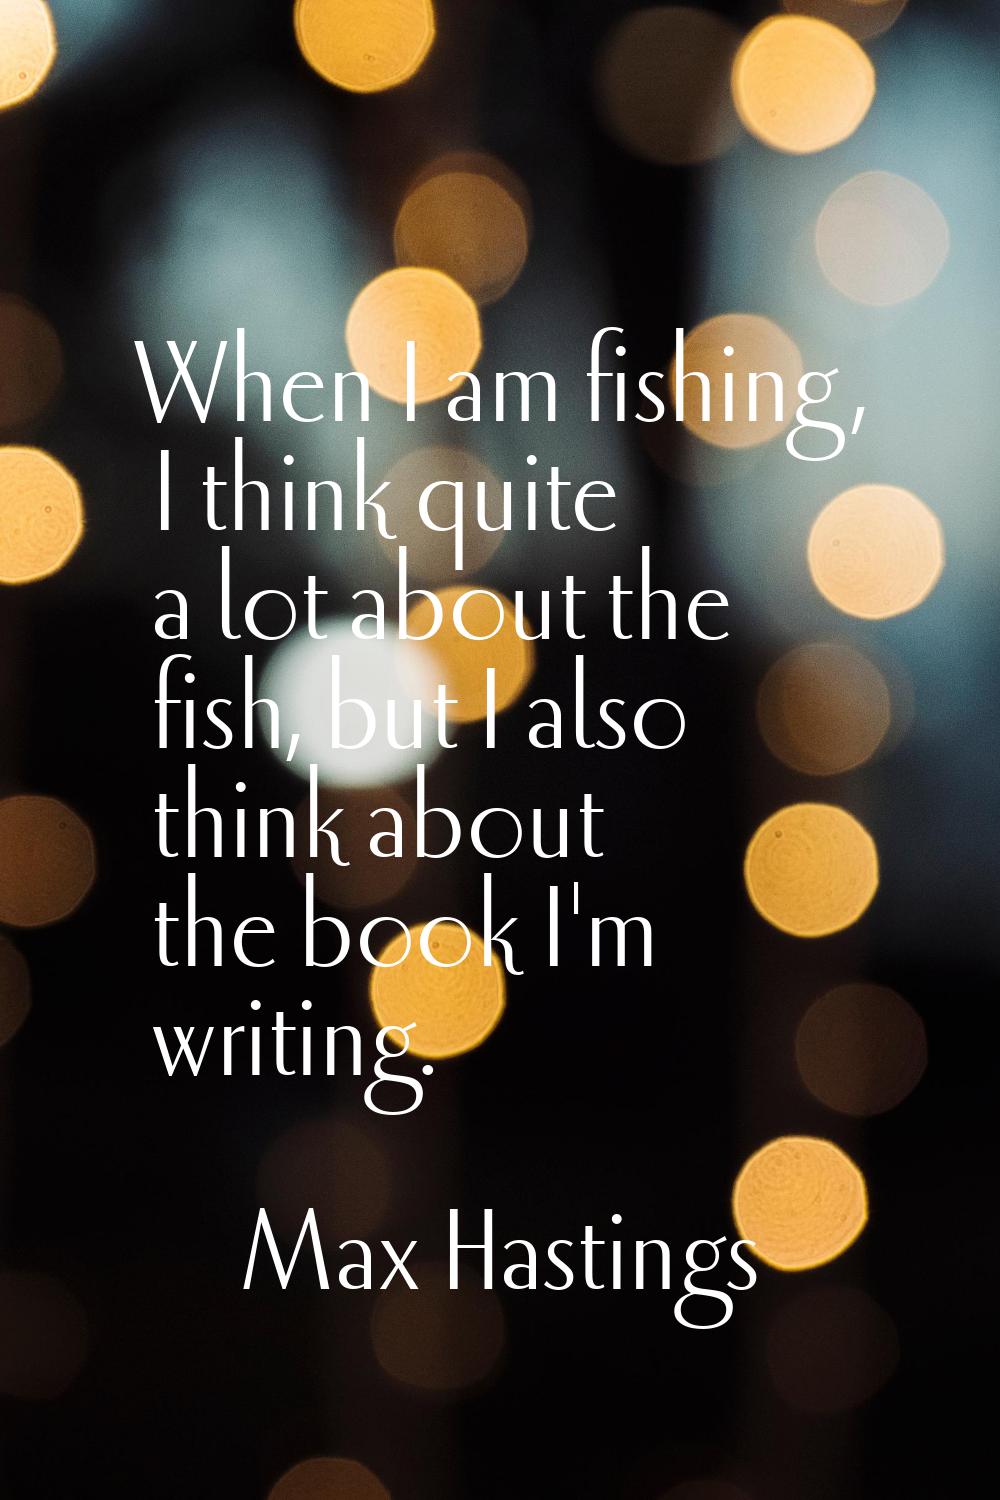 When I am fishing, I think quite a lot about the fish, but I also think about the book I'm writing.